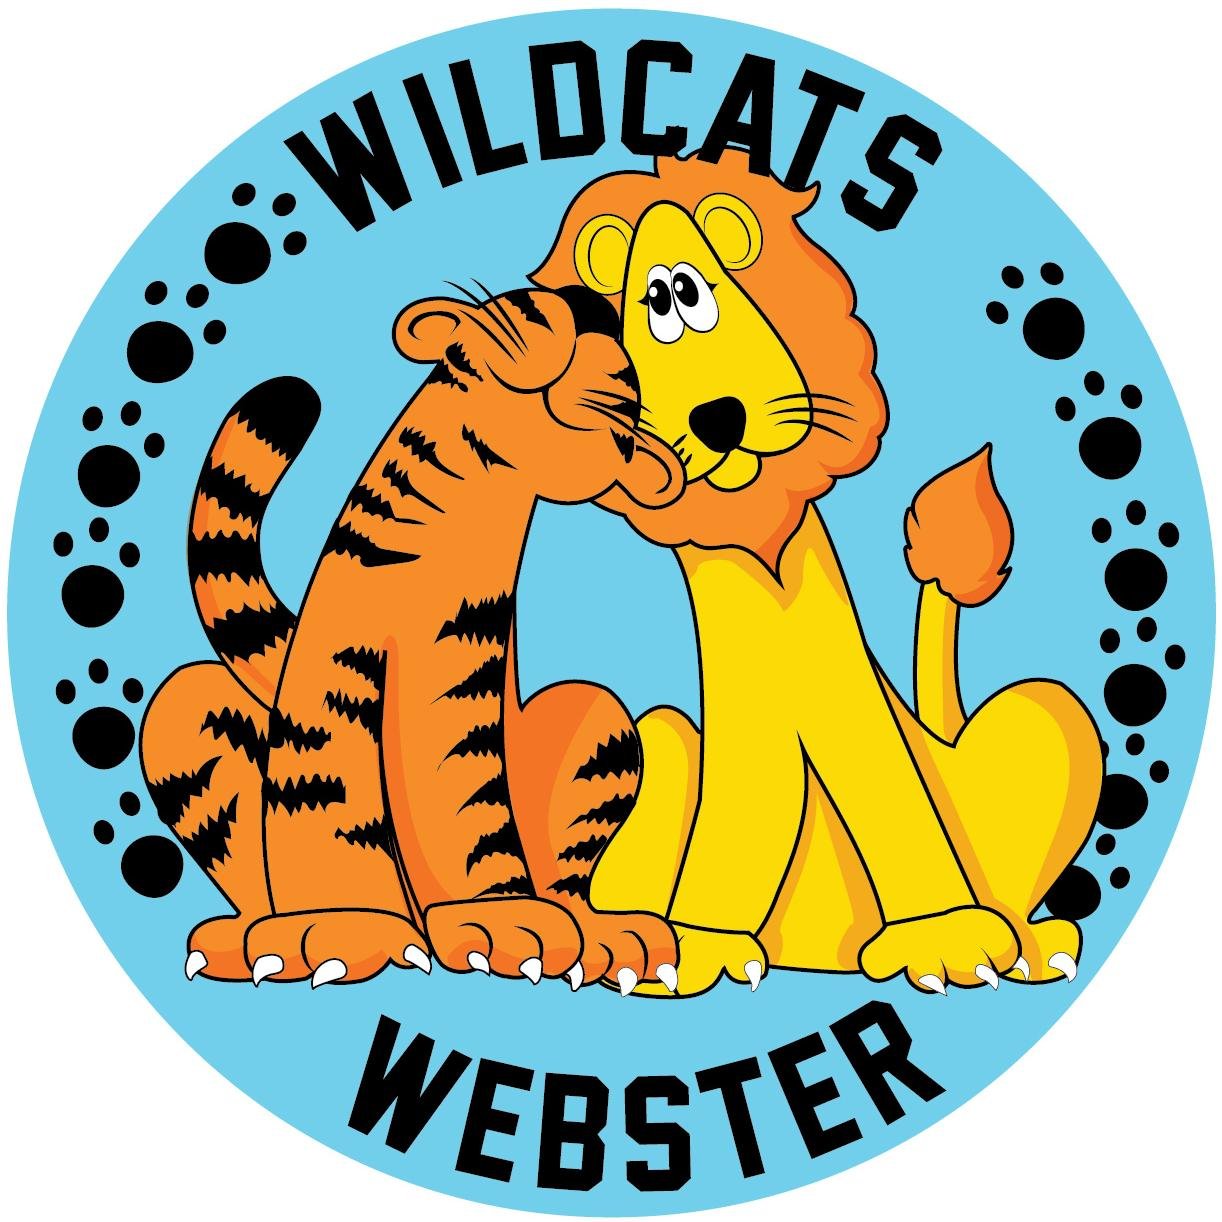 At Webster Elementary, we strive ensure student achievement through an environment of high expectations, collaboration, and commitment to character.